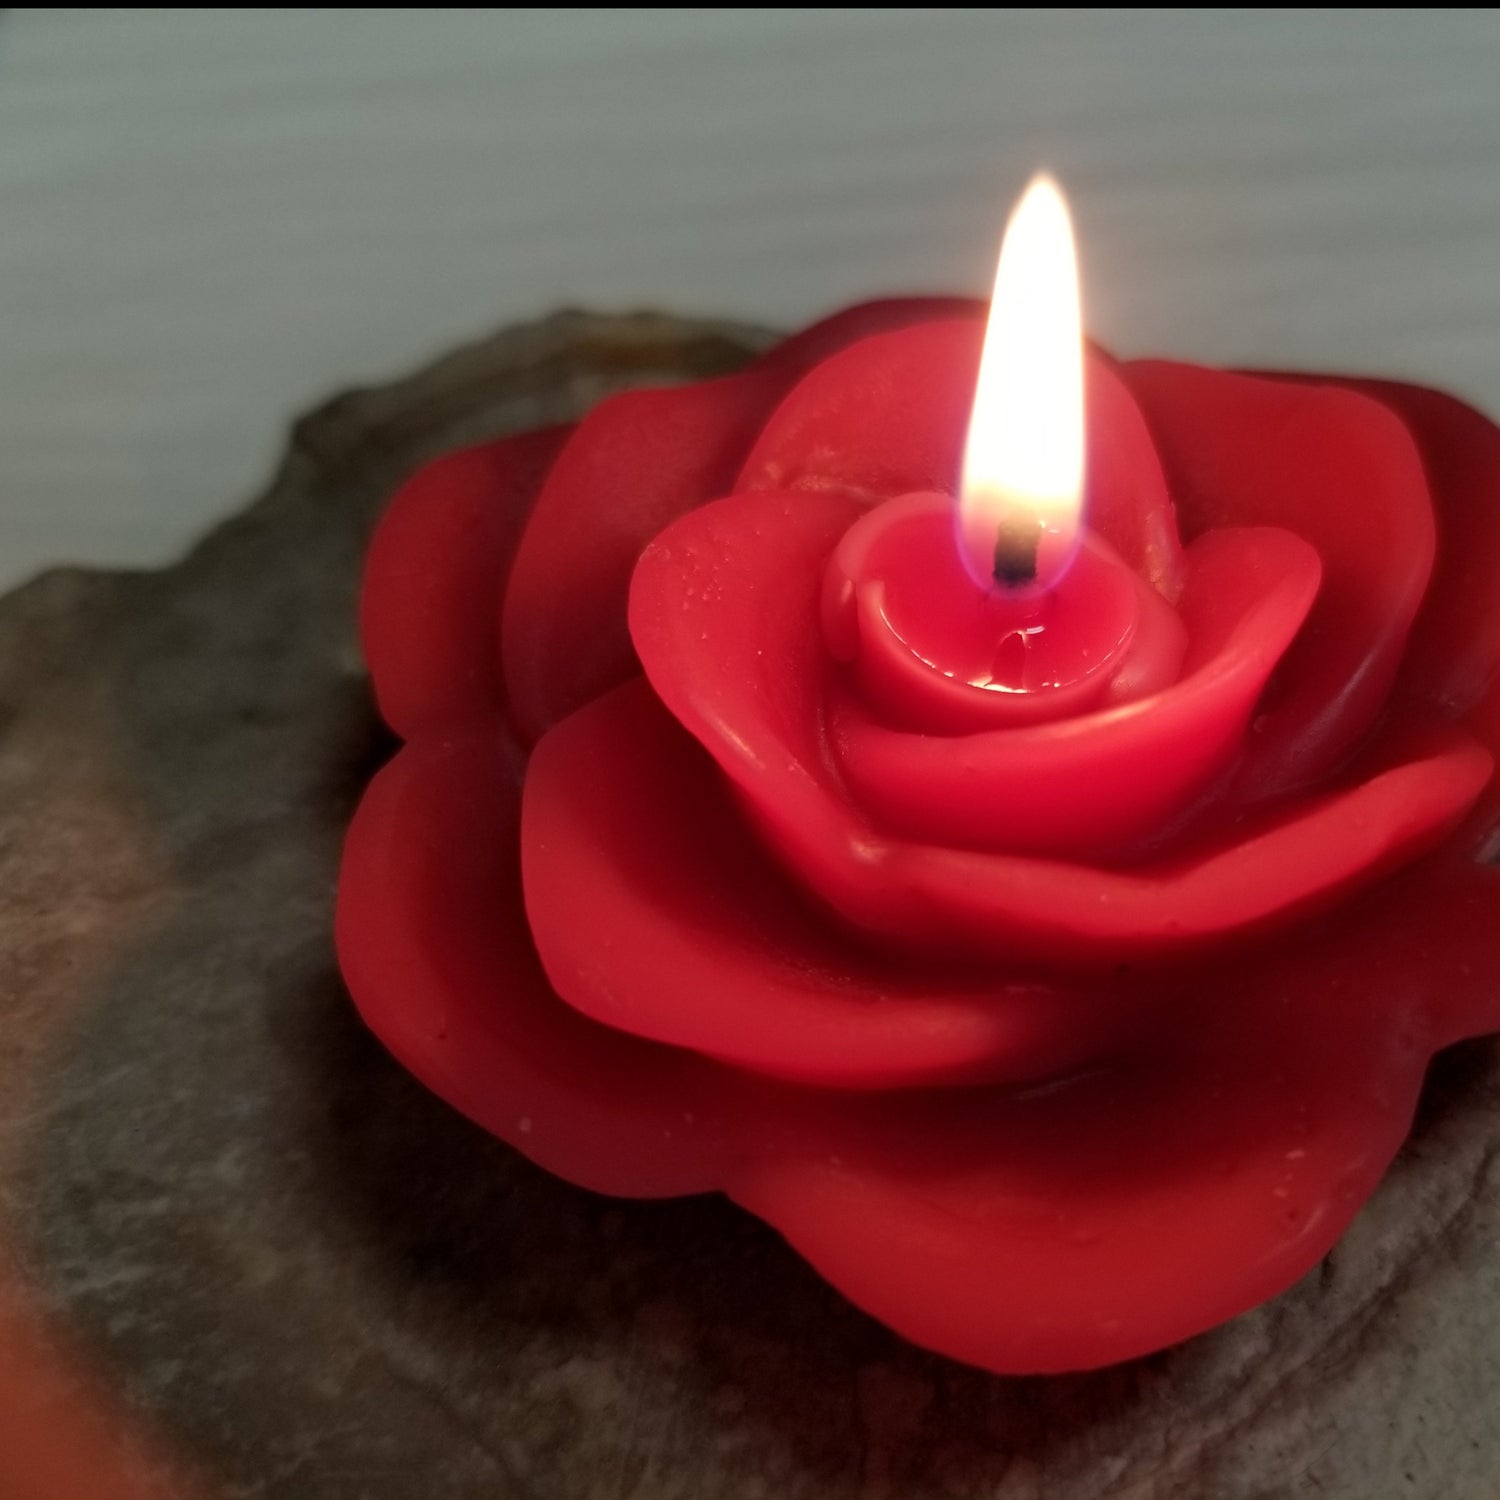 red rose candle burning